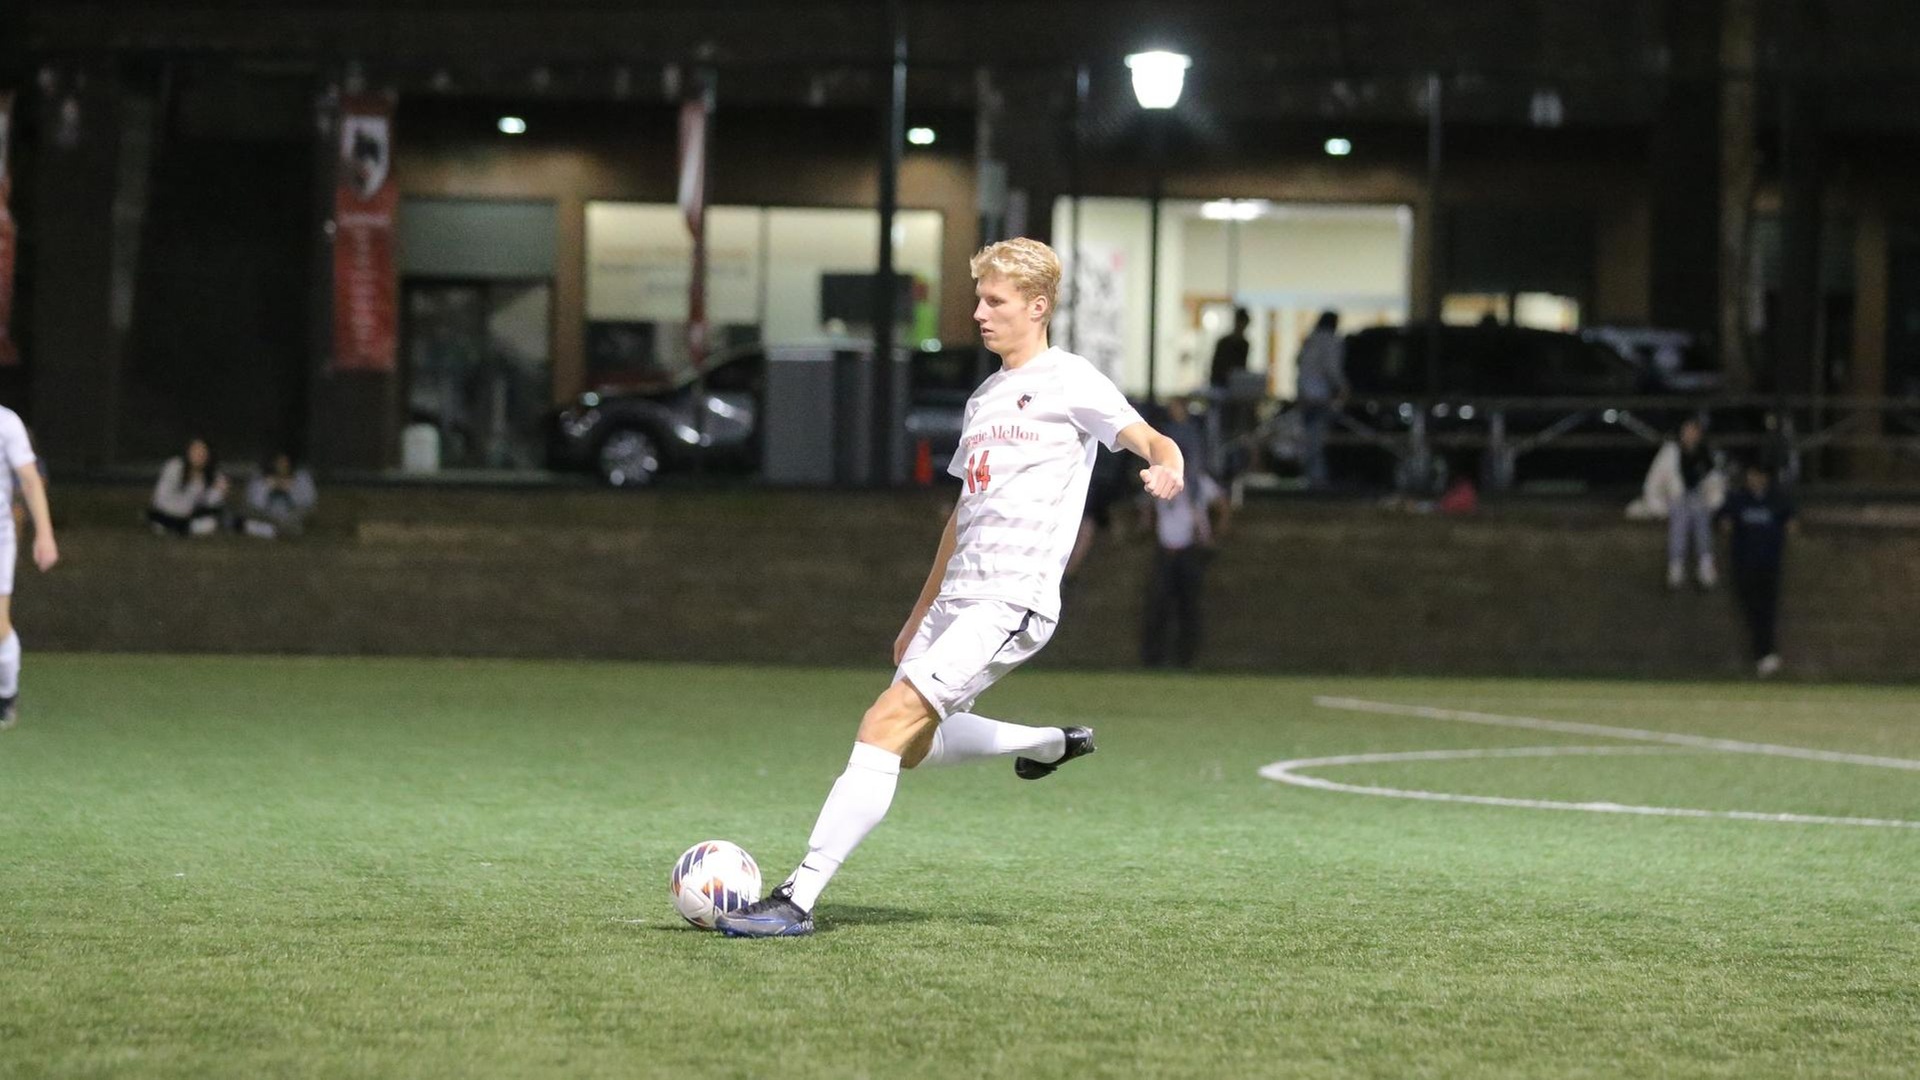 men's soccer player wearing a white uniform prepares to strike the ball with his right foot